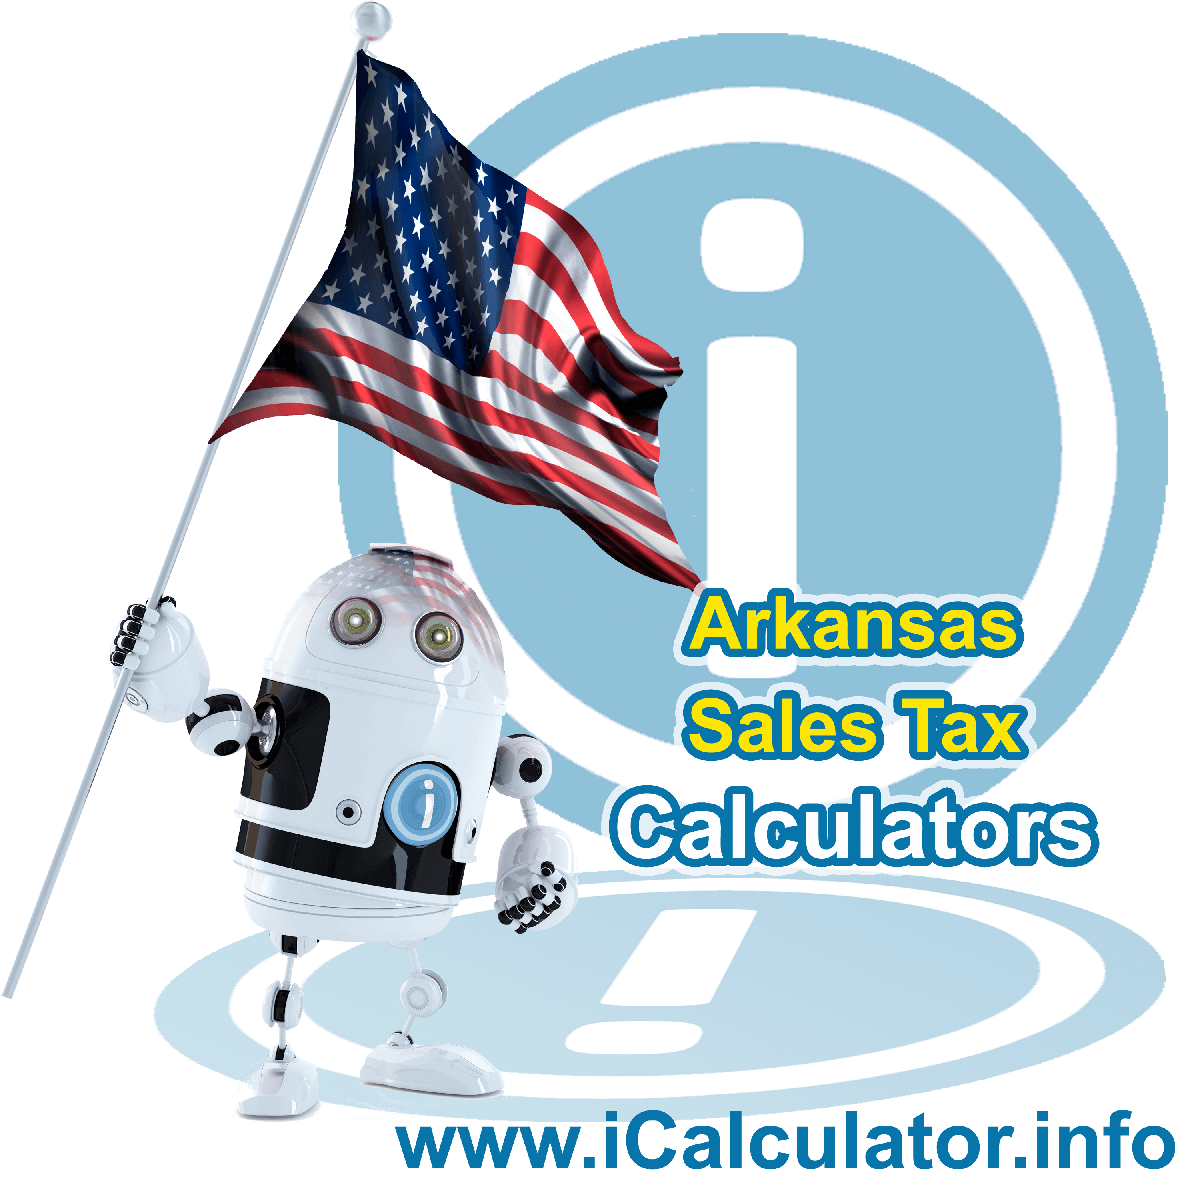 Lee County Sales Rates: This image illustrates a calculator robot calculating Lee County sales tax manually using the Lee County Sales Tax Formula. You can use this information to calculate Lee County Sales Tax manually or use the Lee County Sales Tax Calculator to calculate sales tax online.